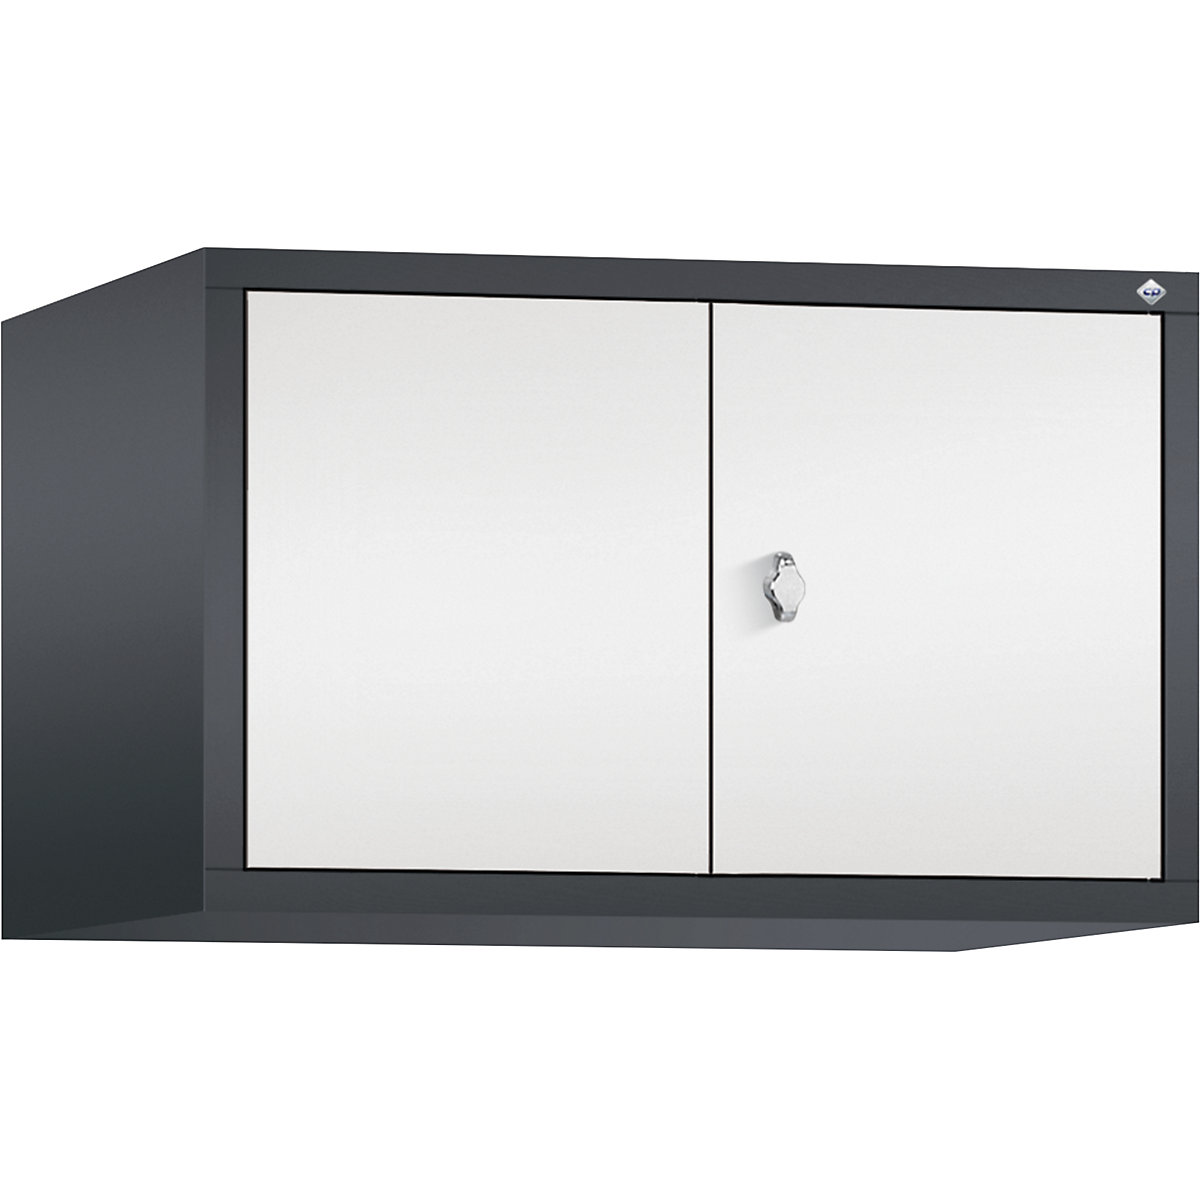 CLASSIC add-on cupboard, doors close in the middle – C+P